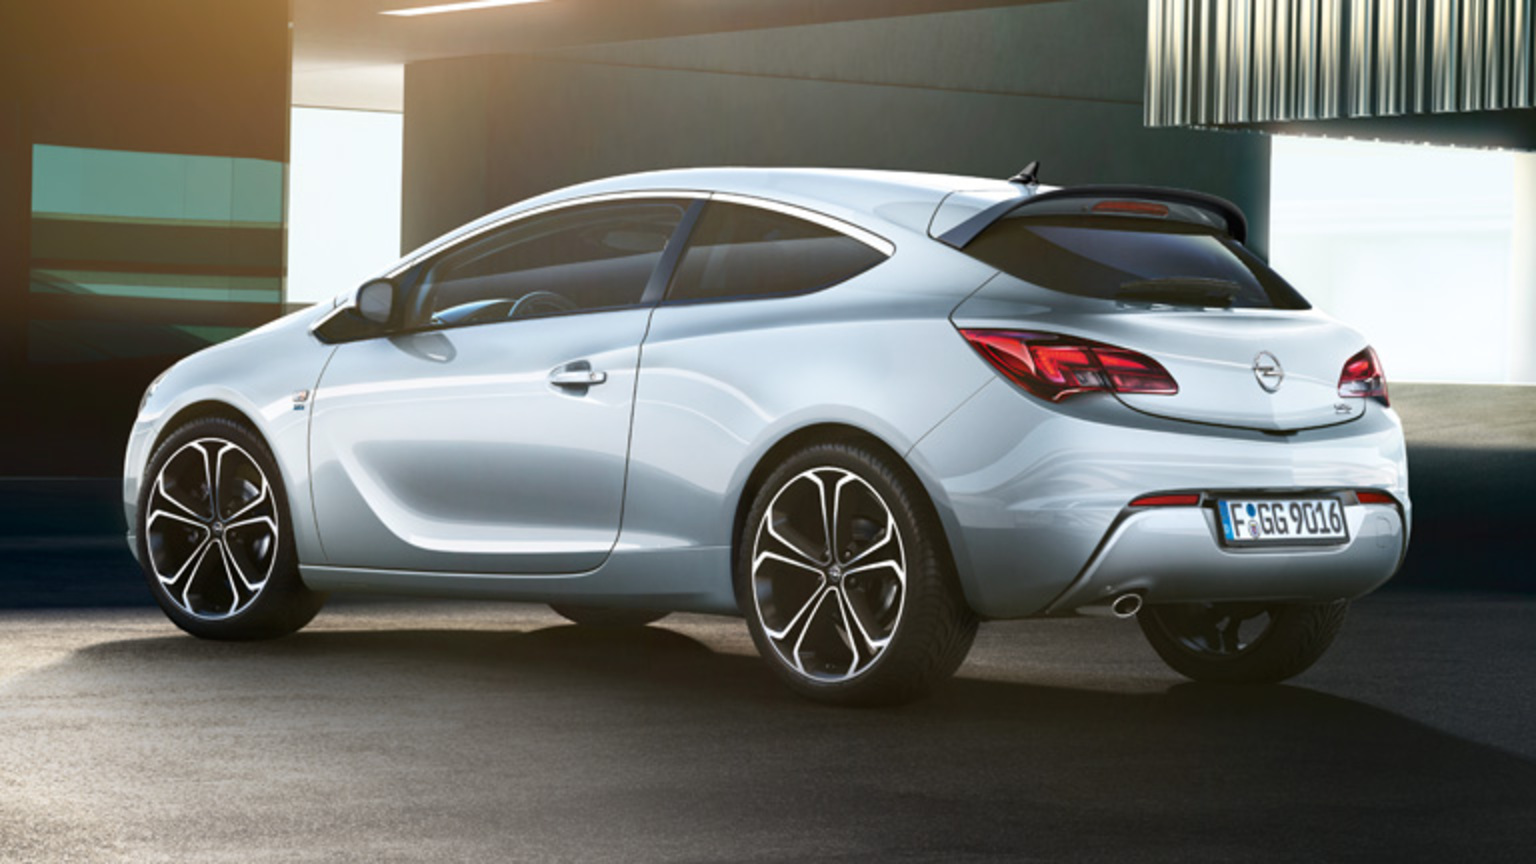 Opel Astra GTC: compact class car with many variants - Opel Australia